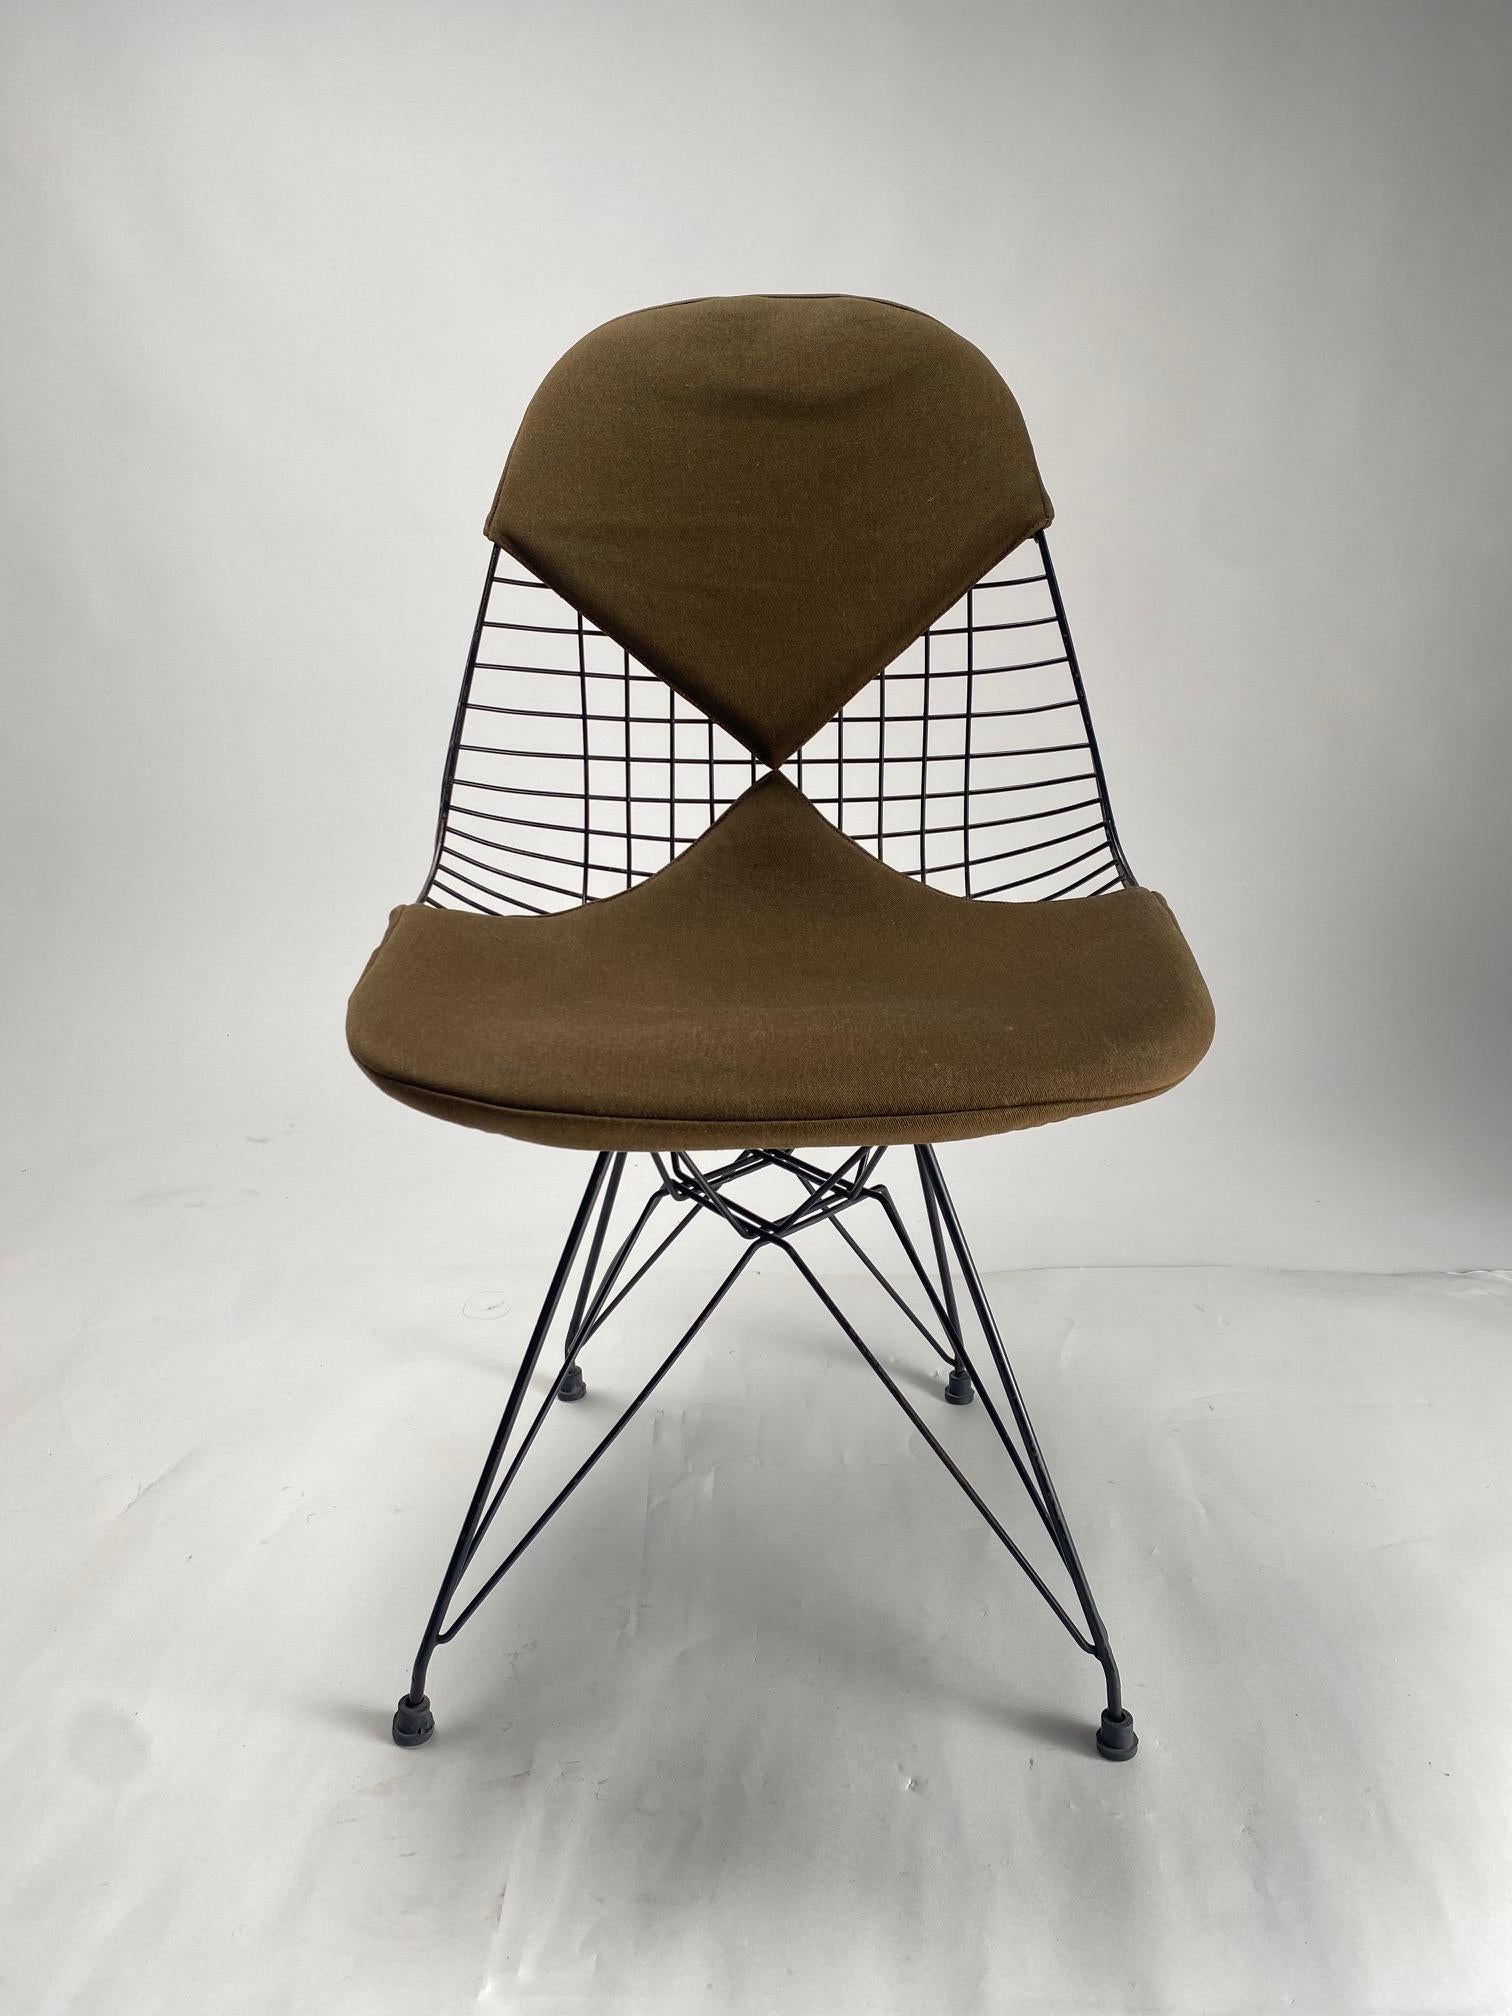 Awesome Classic Brown Eames wire chairs on a black eiffel base with the bikini cover for Herman Miller. 

It is a true icon of mid-century American design, offered here in one of its very first versions. The two chairs come from an important house